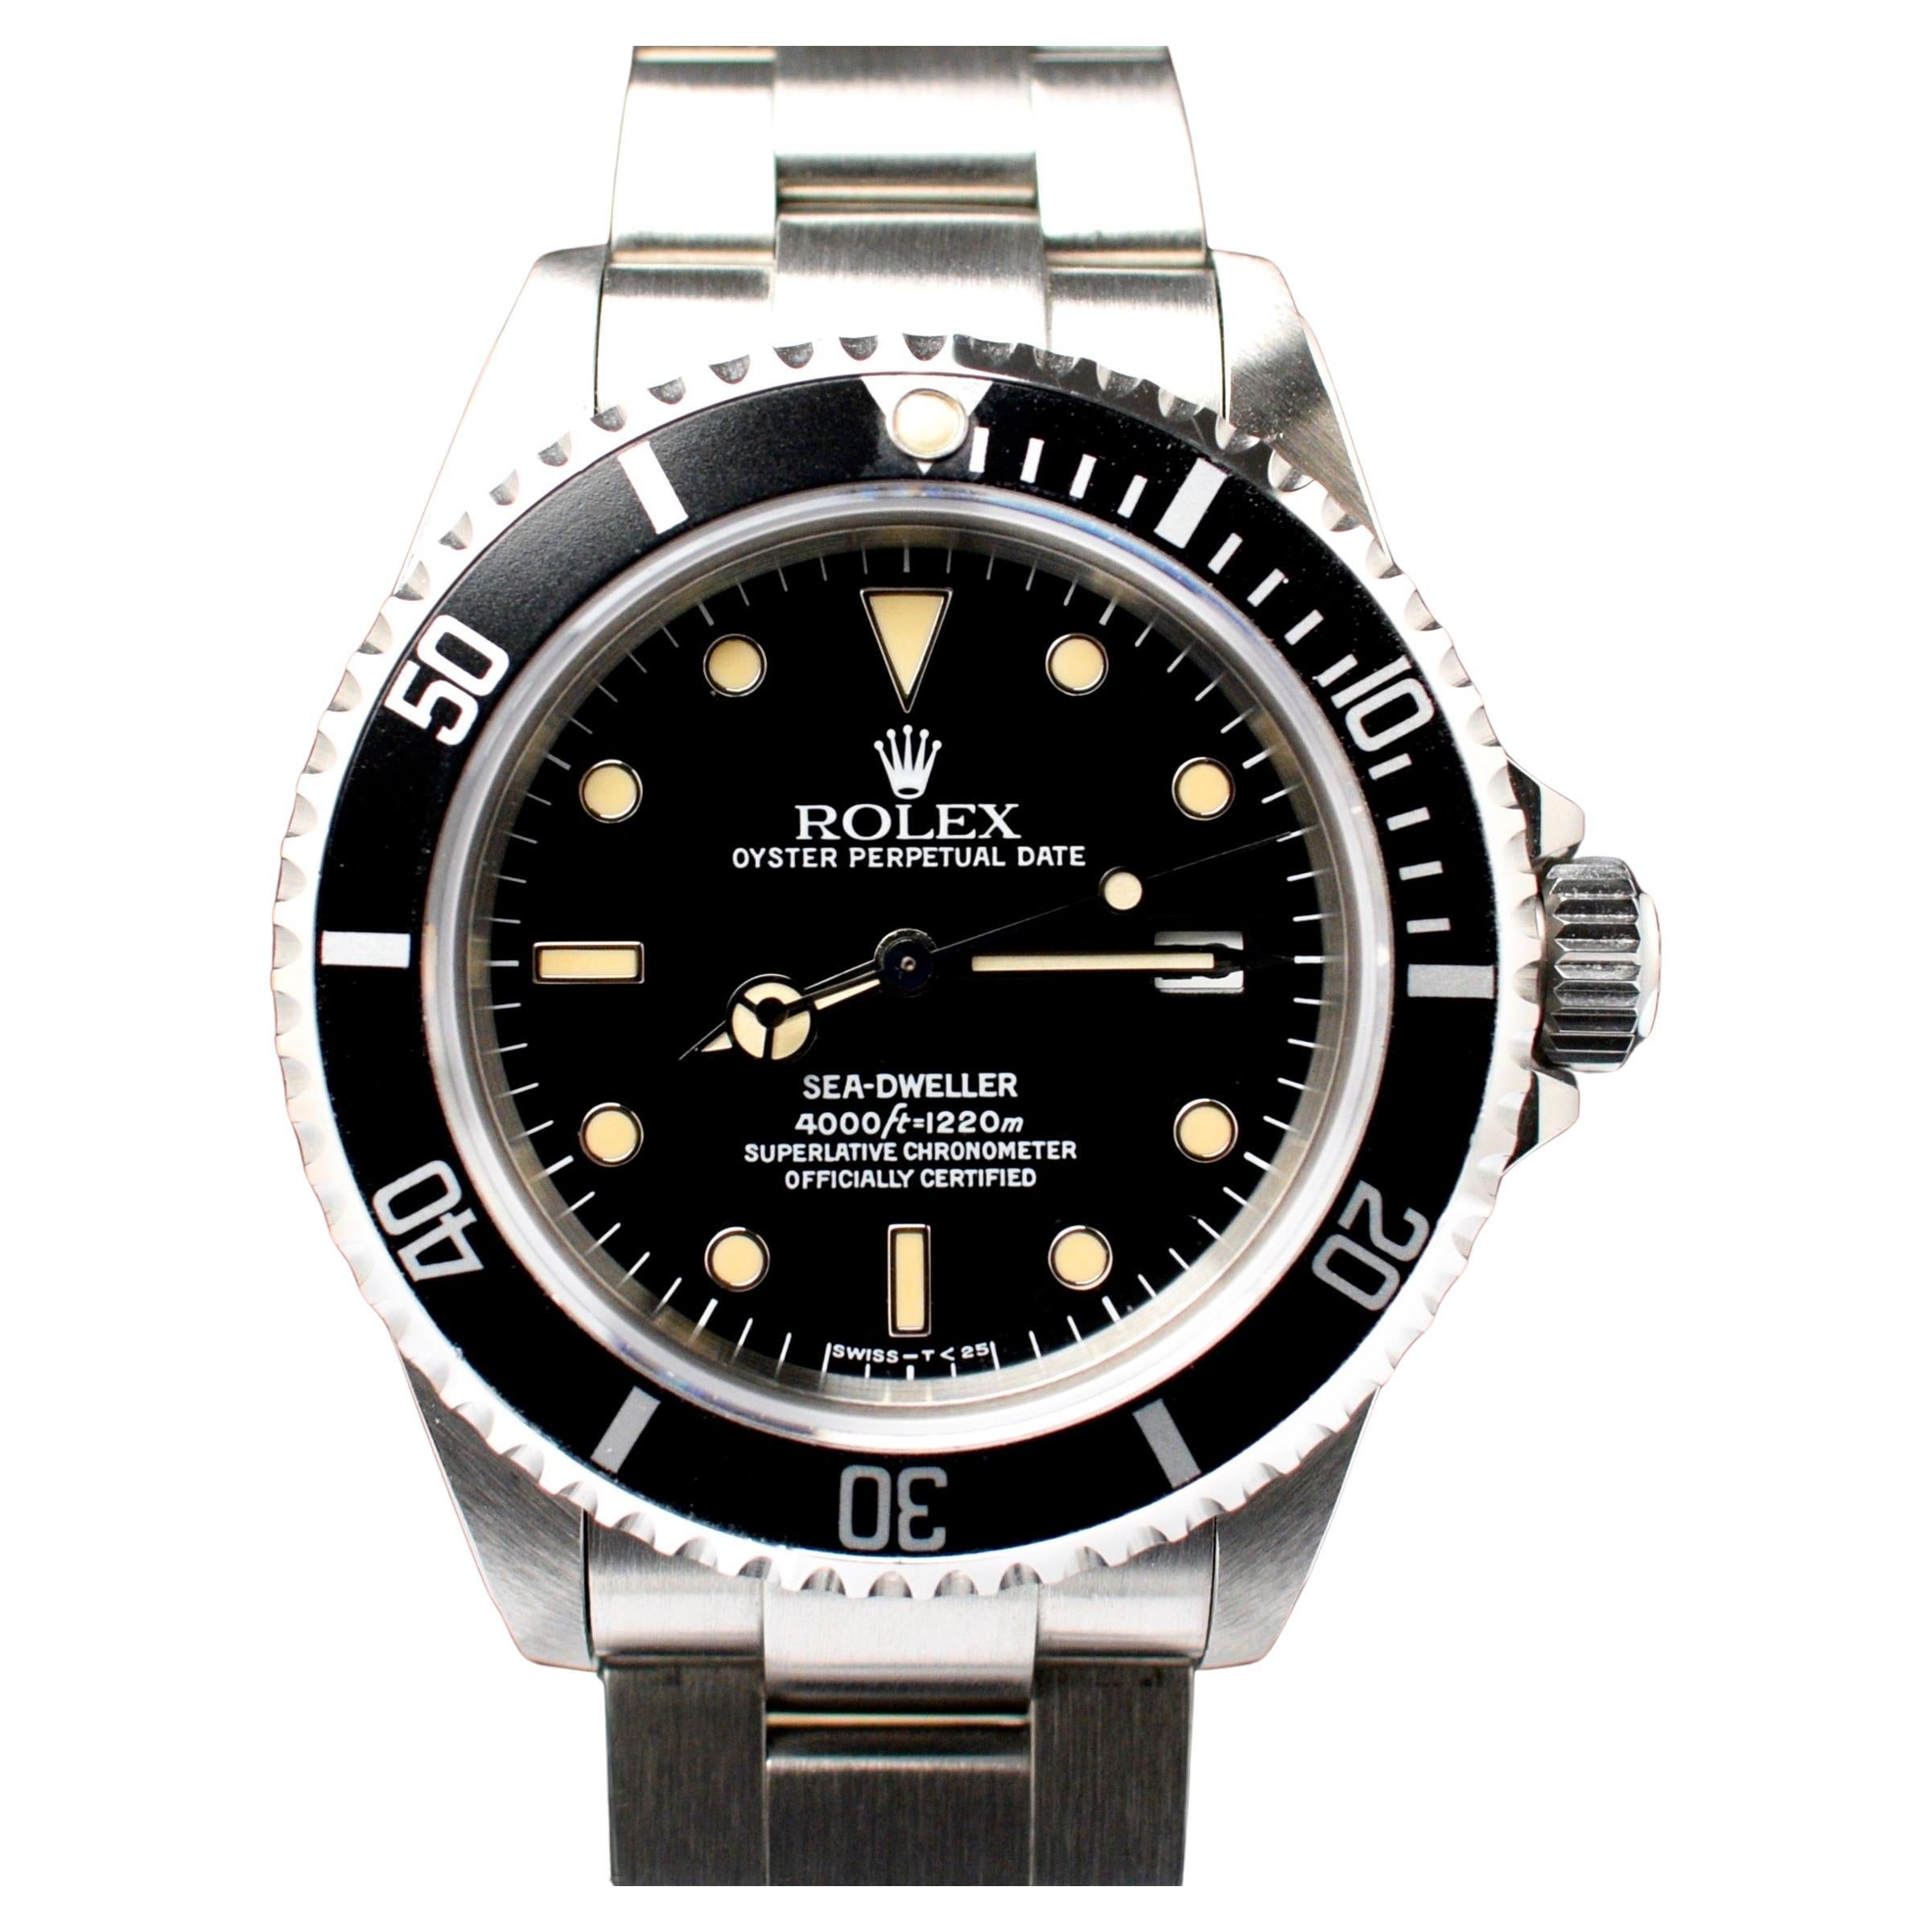 Rolex Sea-Dweller Submariner Creamy 16600 Steel Automatic Watch w/Paper, 1991 For Sale